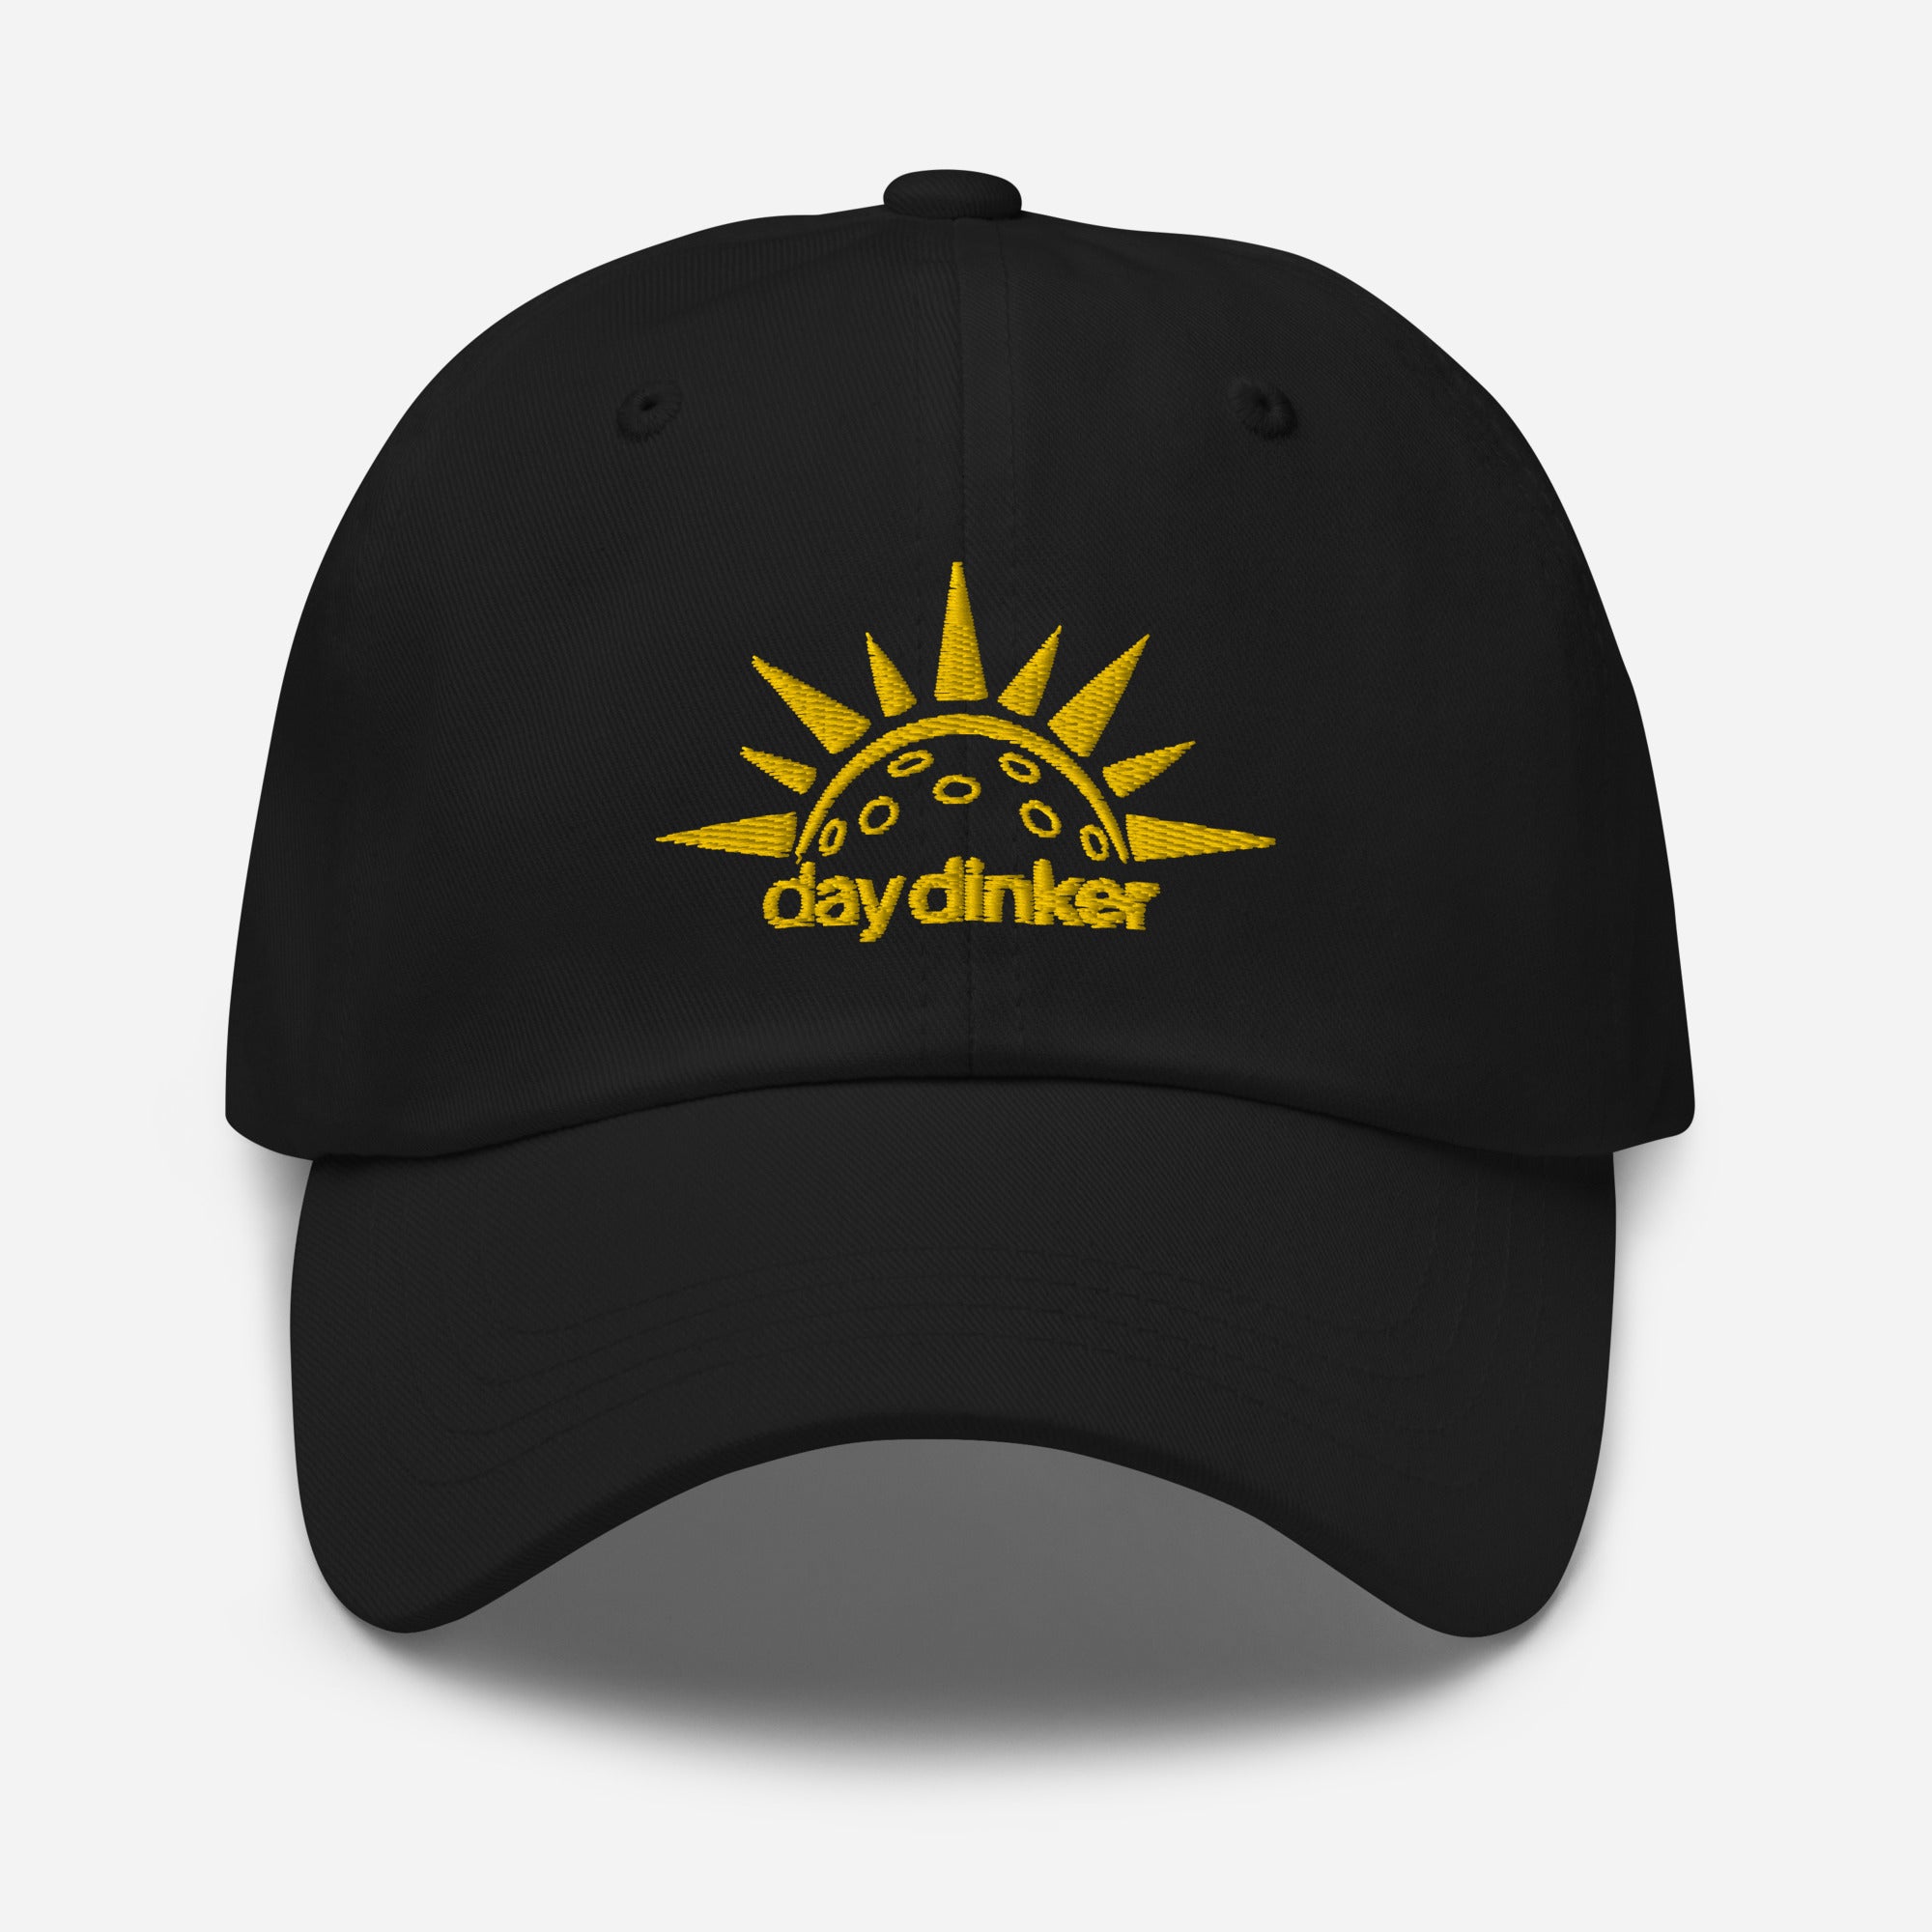 black embroidered day dinker pickleball dad hat with pickleball sun pattern yellow on black adjustable